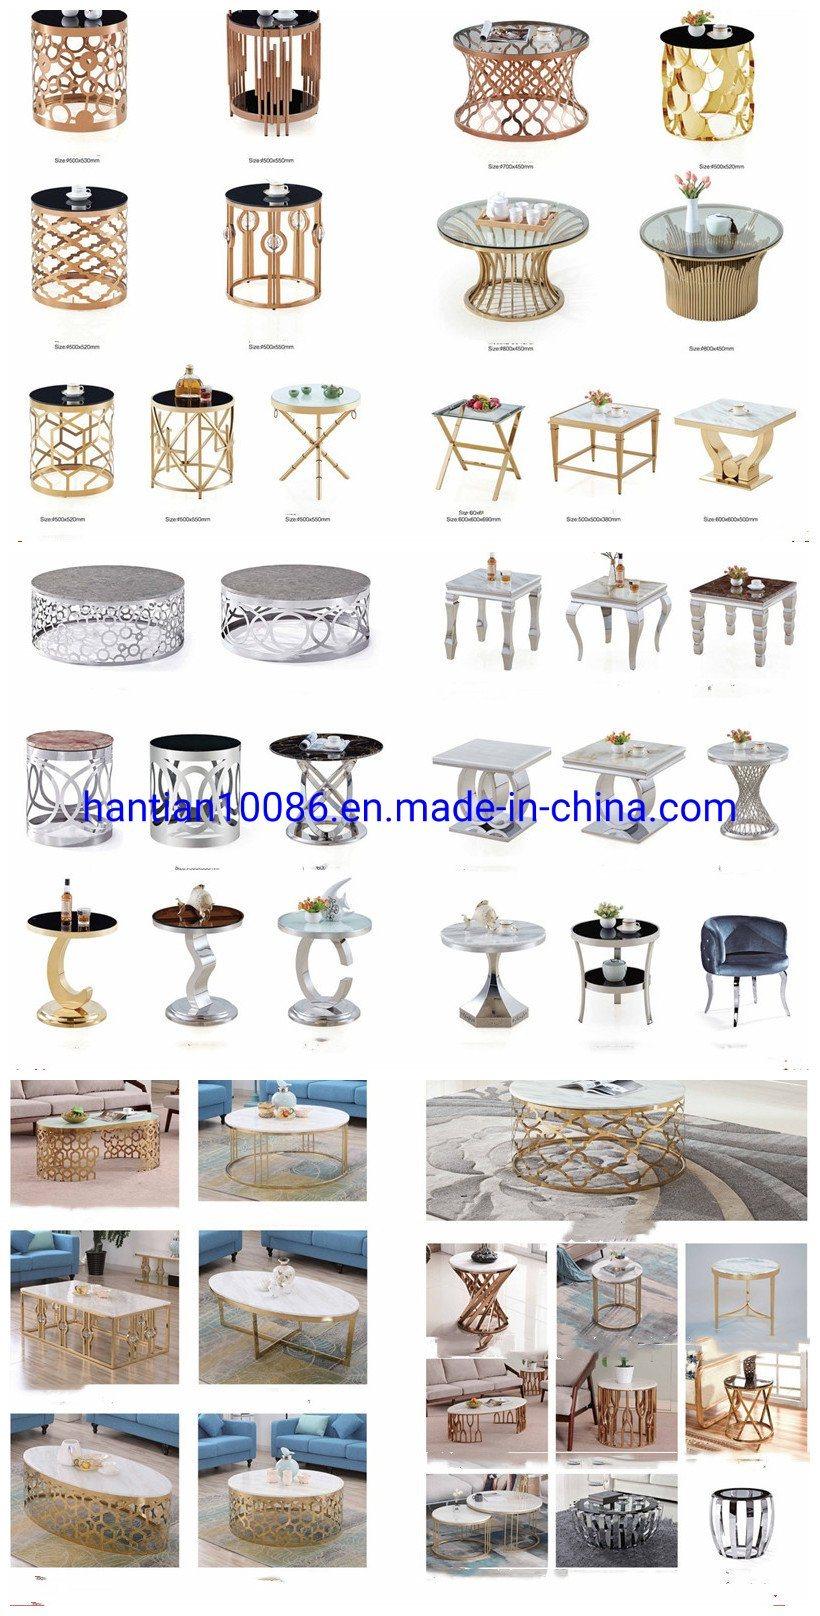 Romantic Rose Gold Wedding Hall Stainless Steel Dining Table and Chair Sets